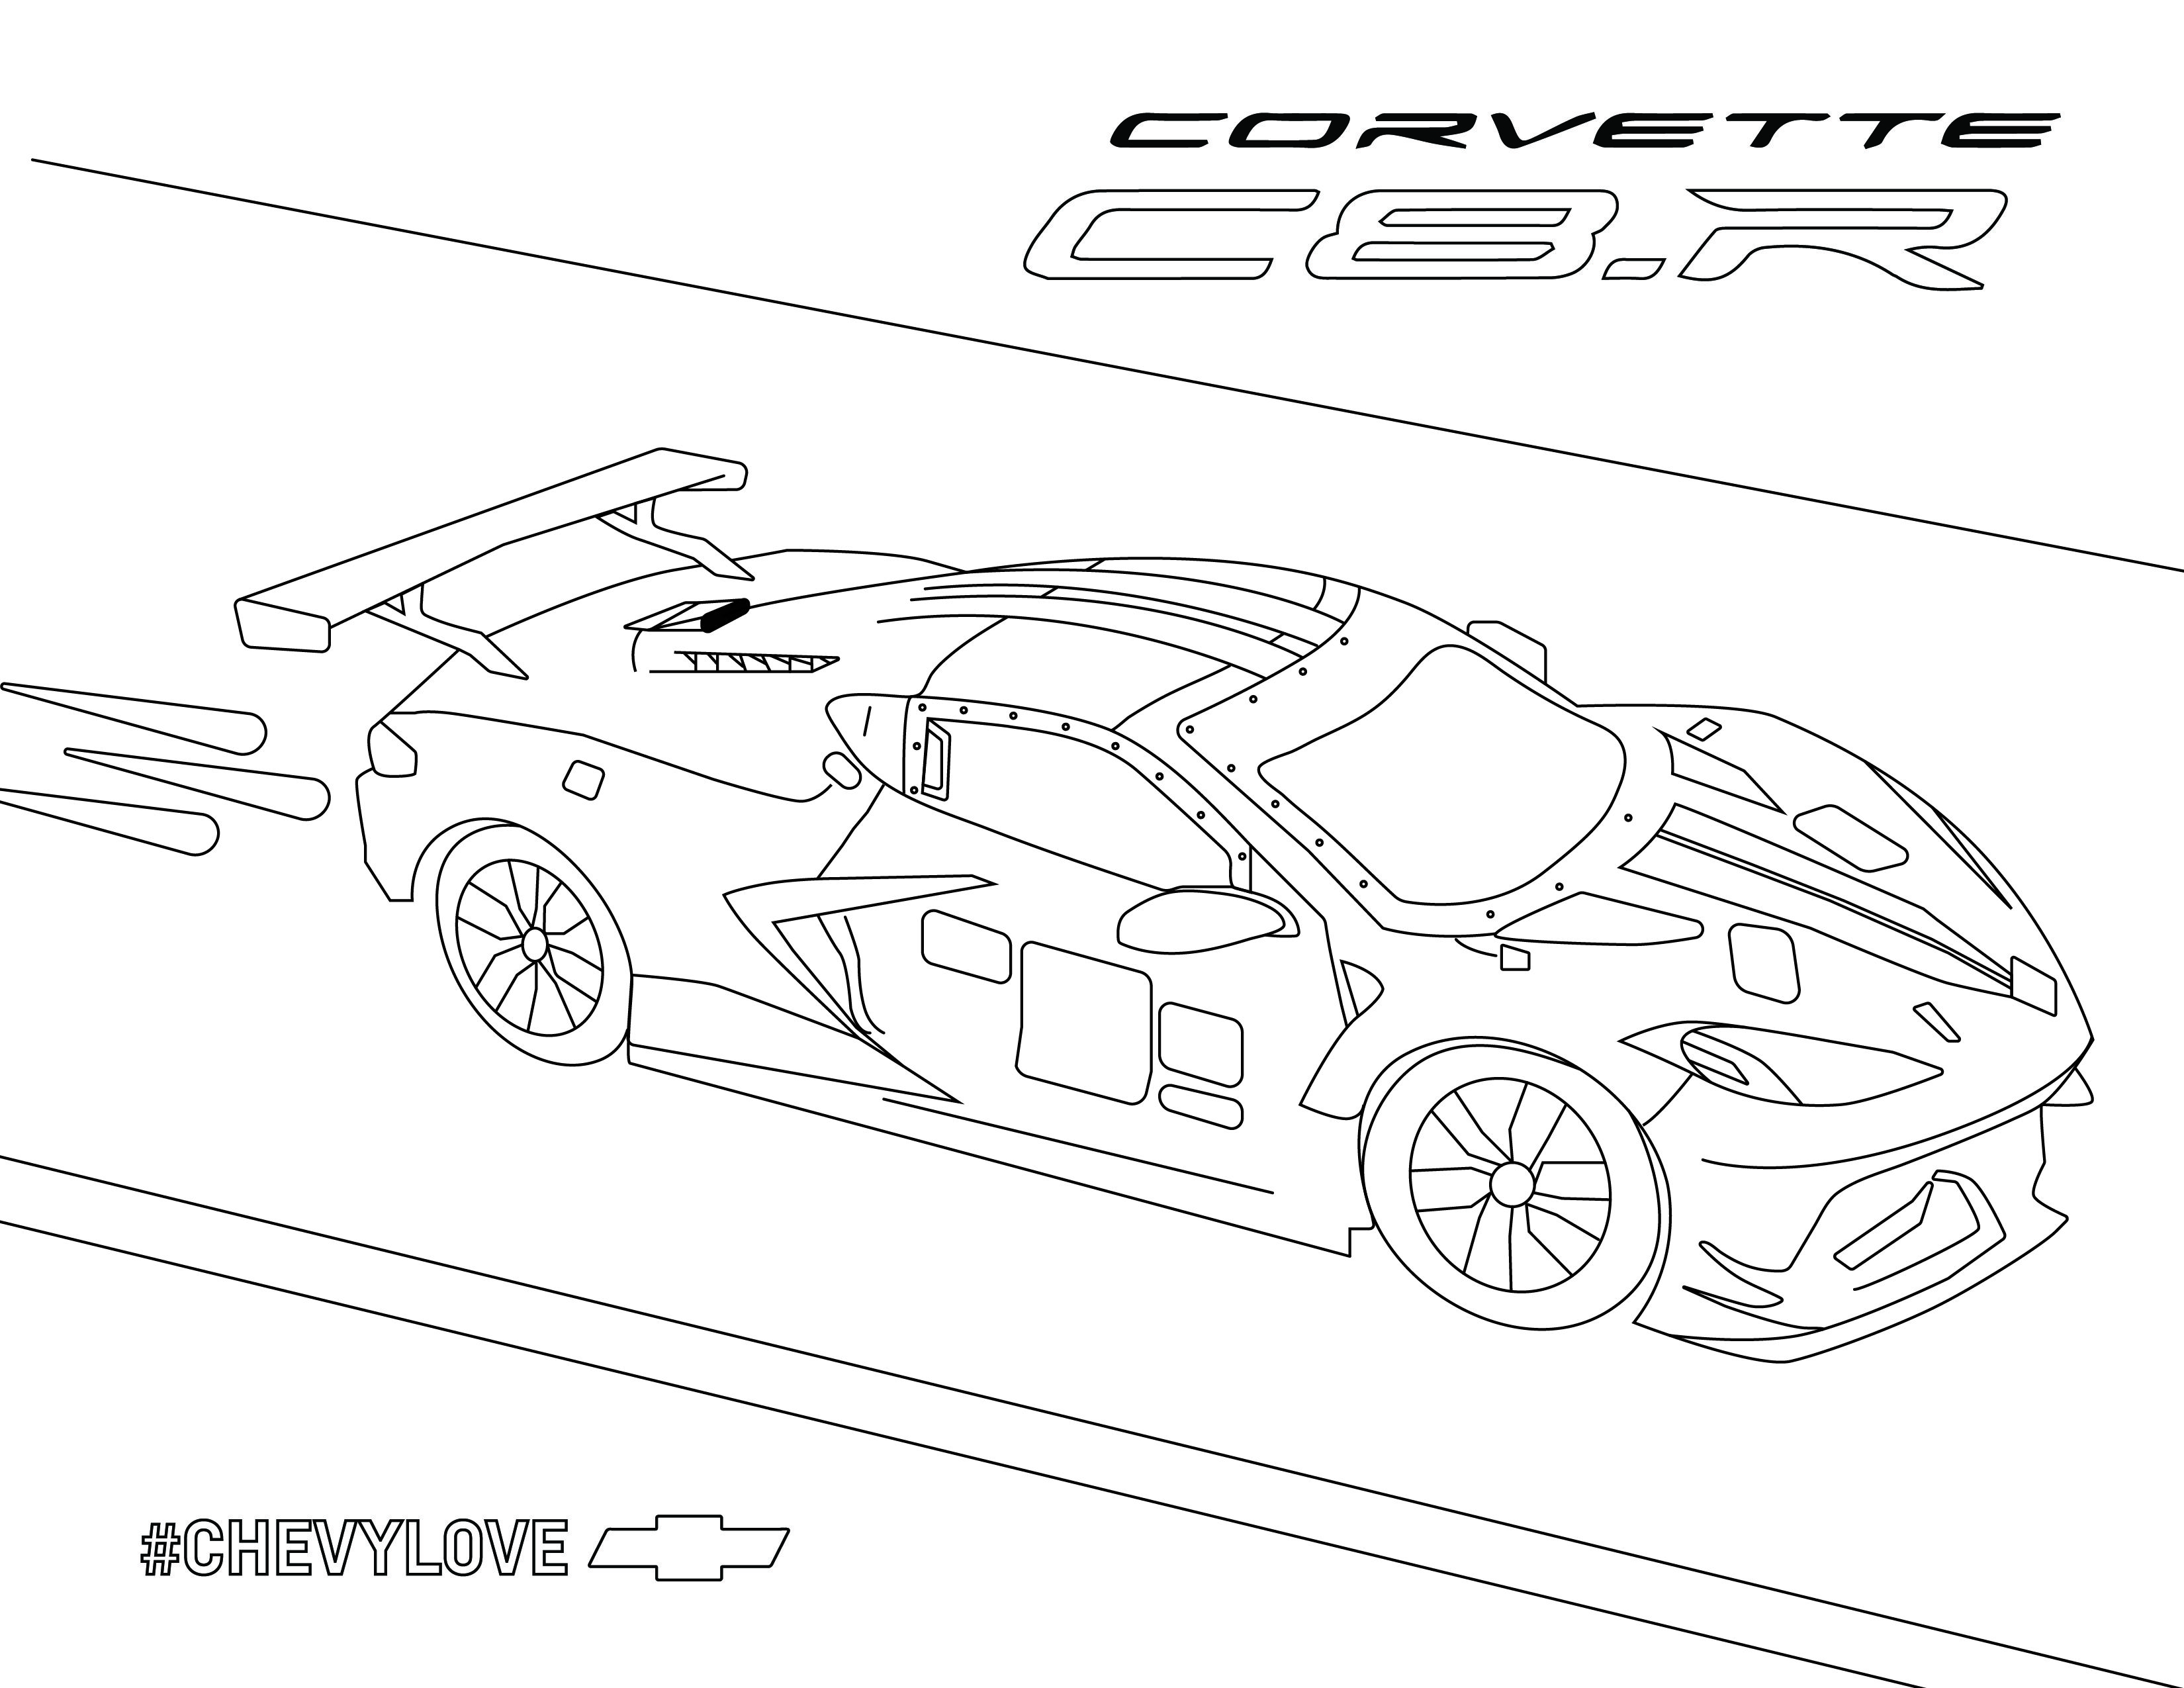 Chevrolet releases childrens coloring pages gm authority